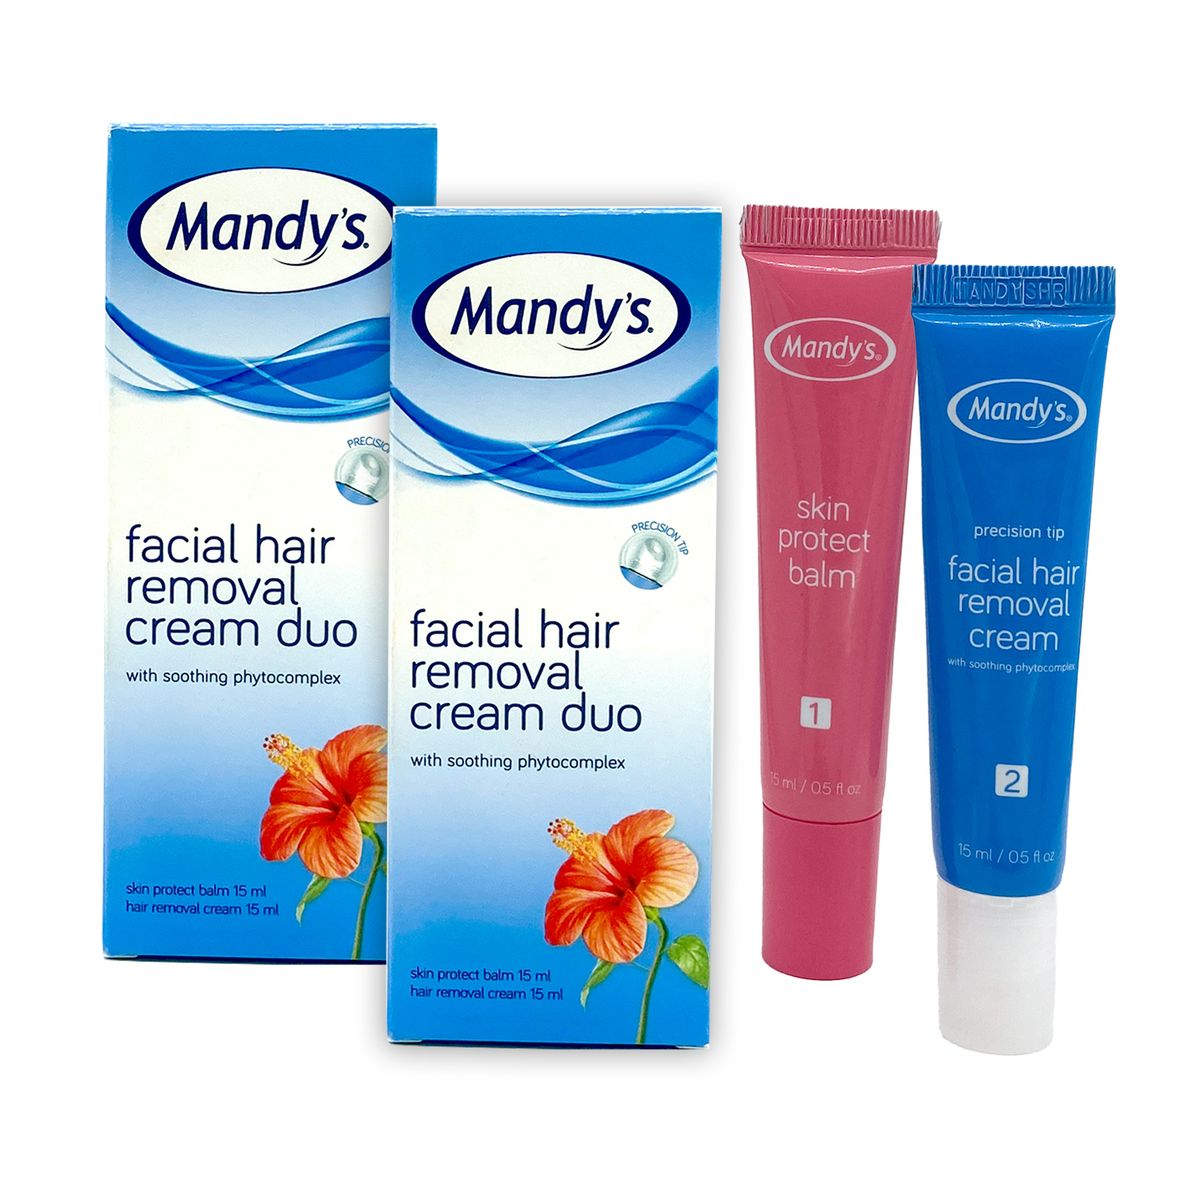 2 x Mandy's Hair Removal Cream Facial Duo Kits | Buy Online in South Africa  